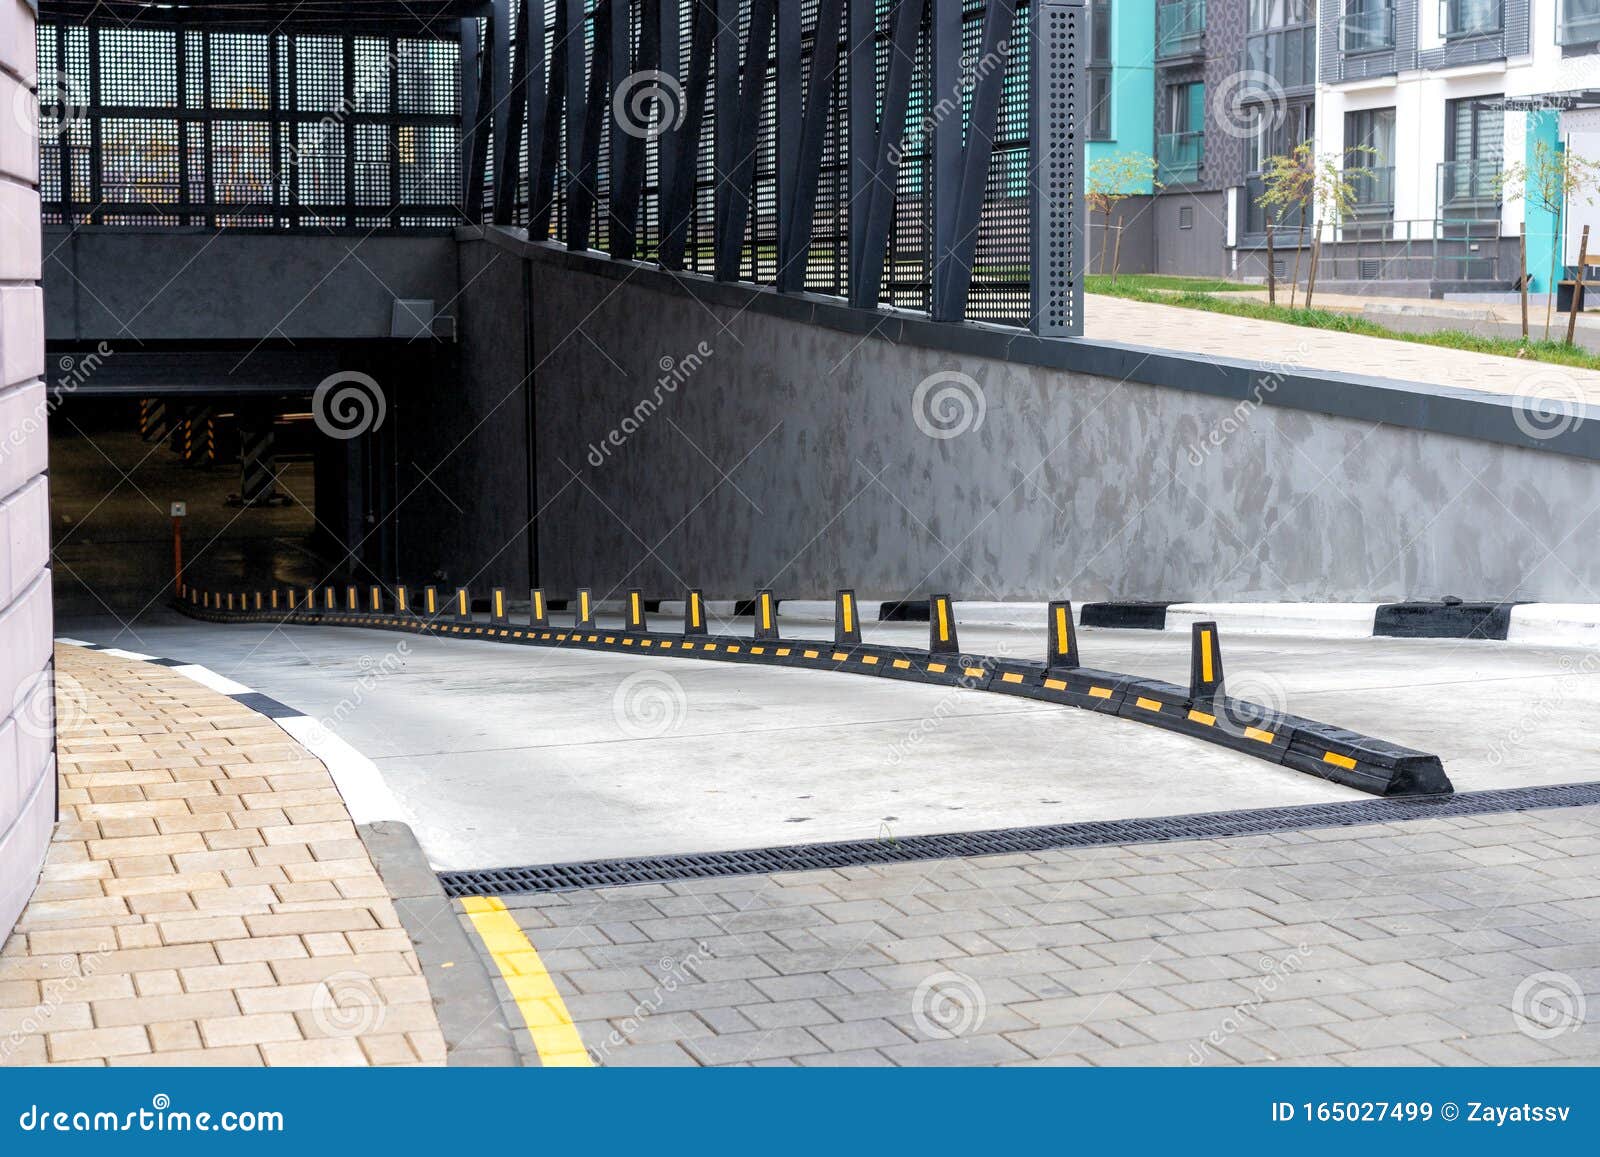 Entry To the Underground Parking Stock Image - Image of dark, exit ...